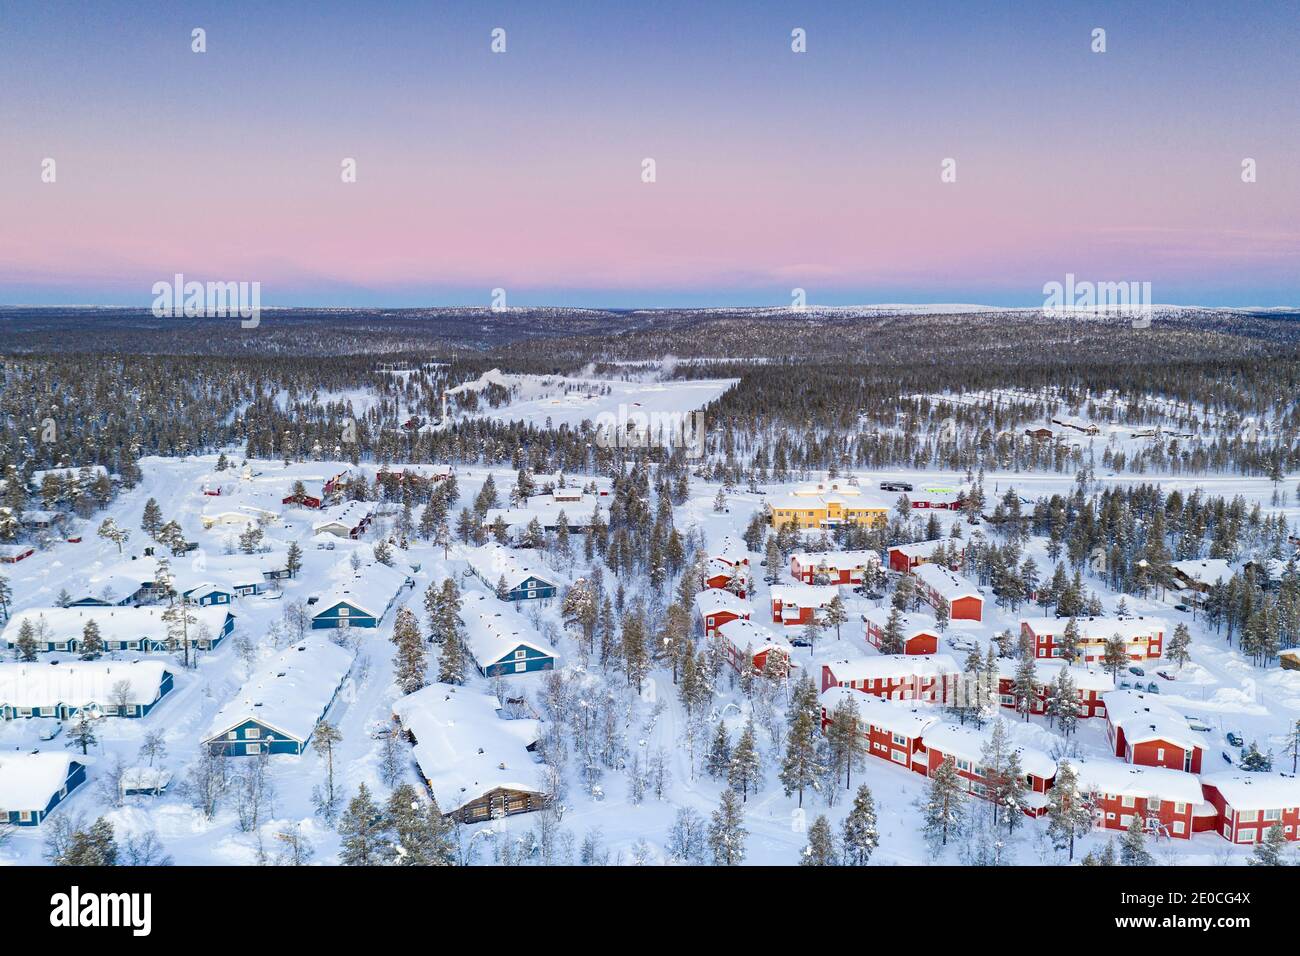 Aerial view of snow capped forest and Saariselka winter tourist resort at sunrise, Inari, Lapland, Finland, Europe Stock Photo